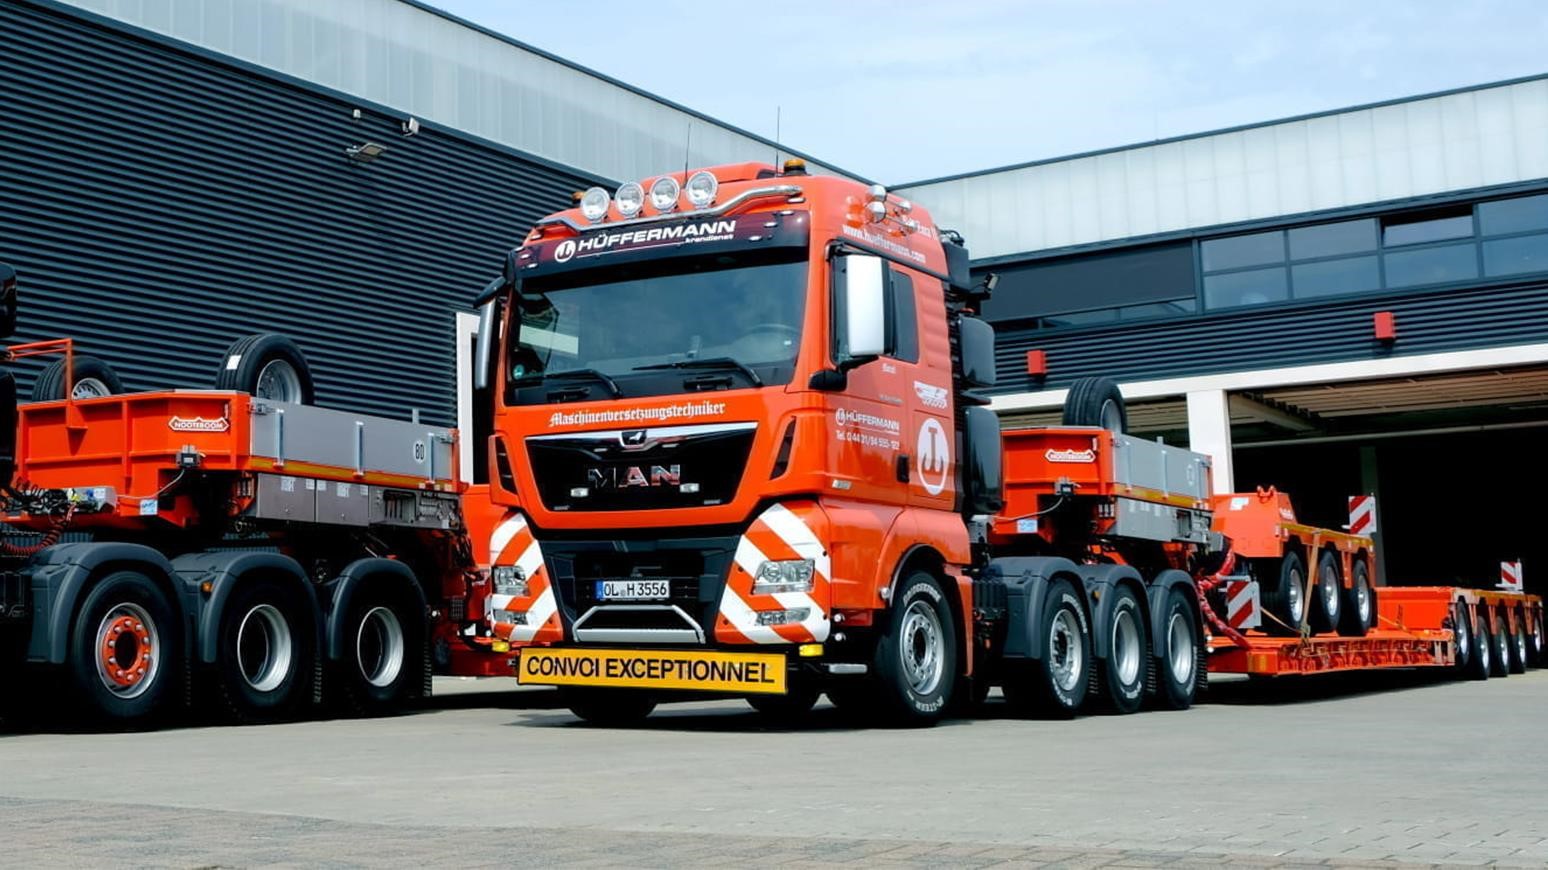 Hüffermann Krandienst Adds Four New Nooteboom EURO-PX Low Loader Trailers As Part Of Ongoing Fleet Expansion